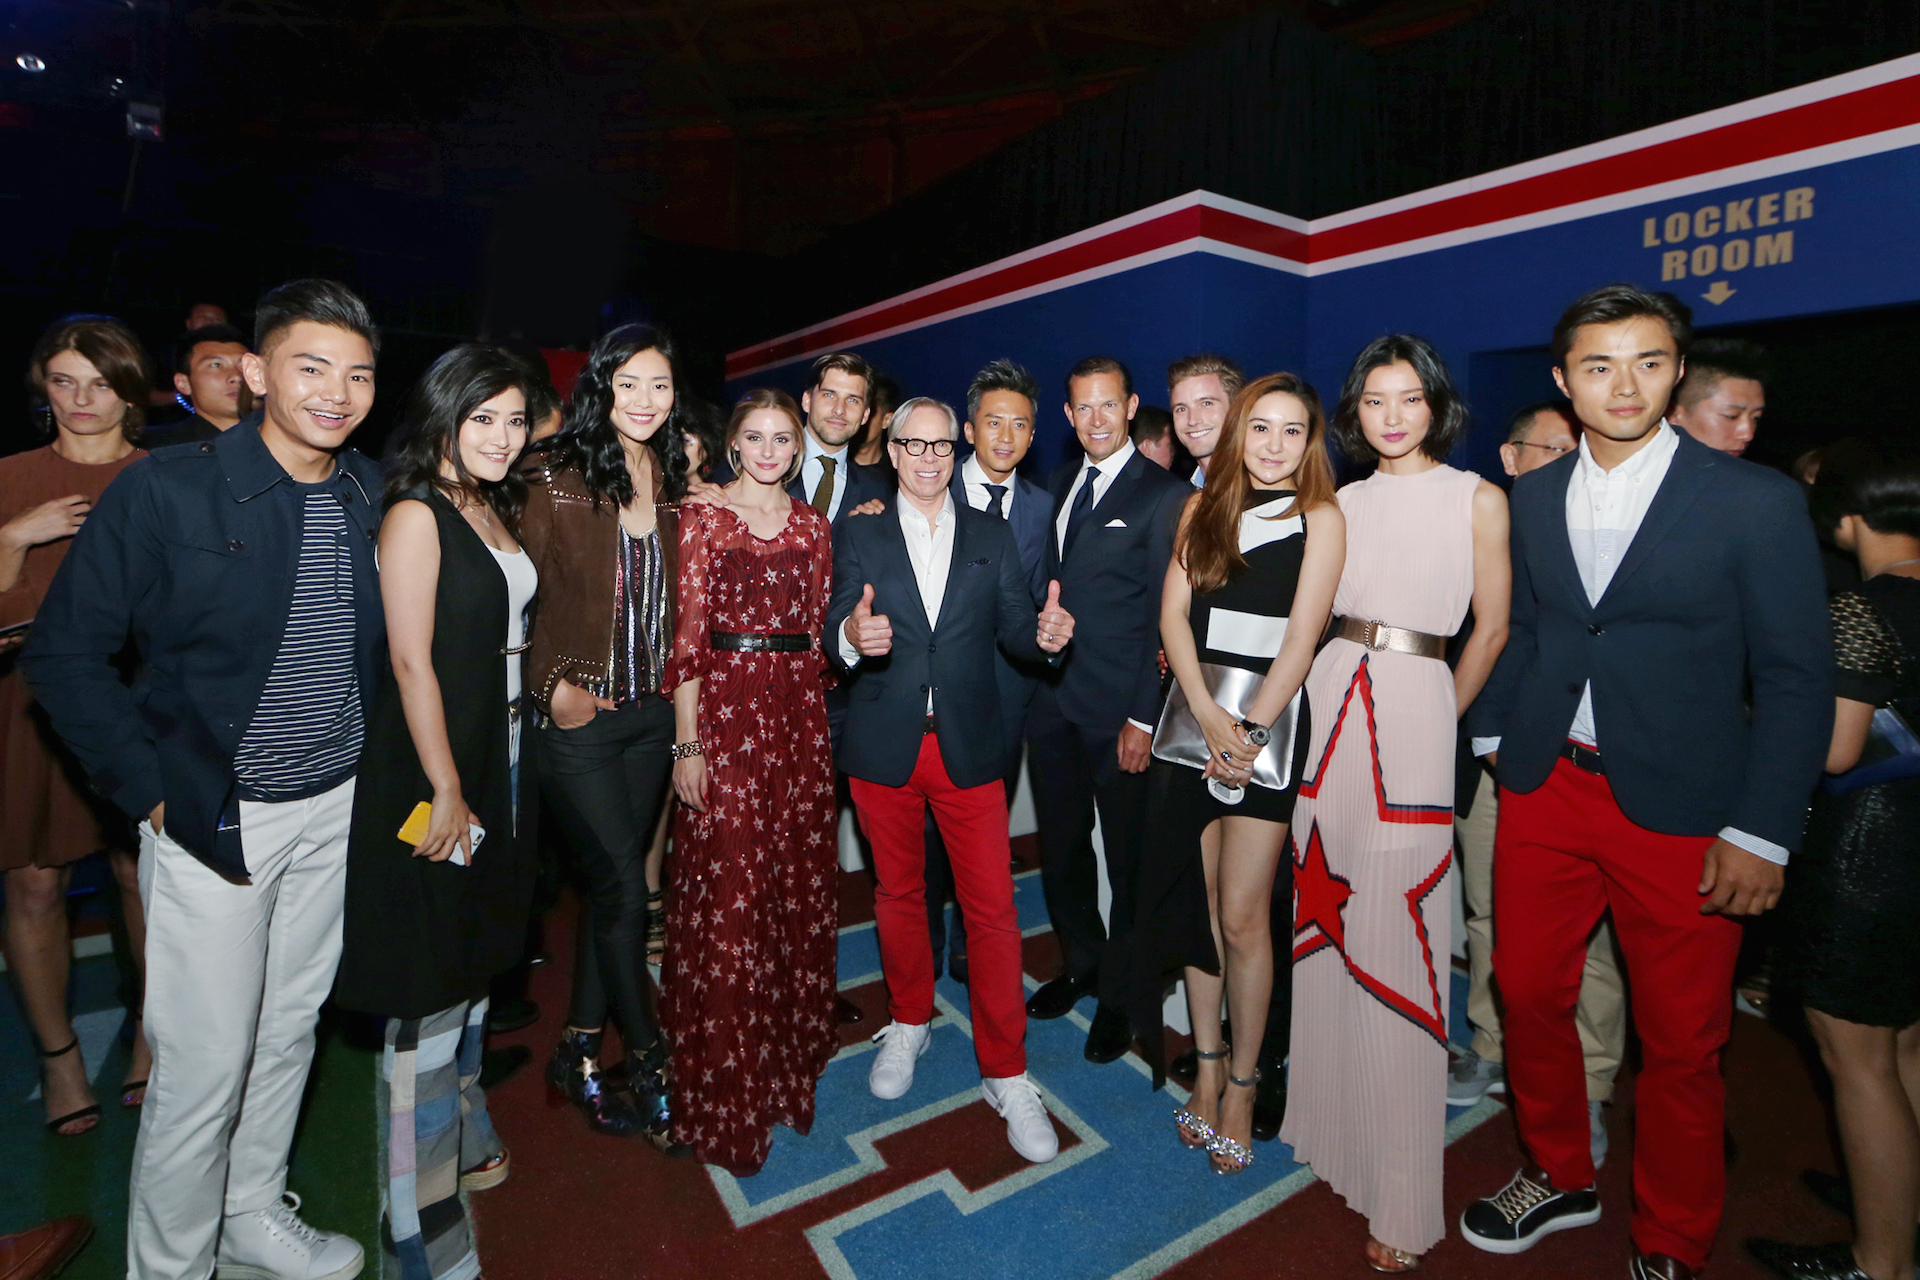 Hilfiger Celebrates 30th Anniversary with Exclusive Fashion Show and Party in Beijing, China | Business